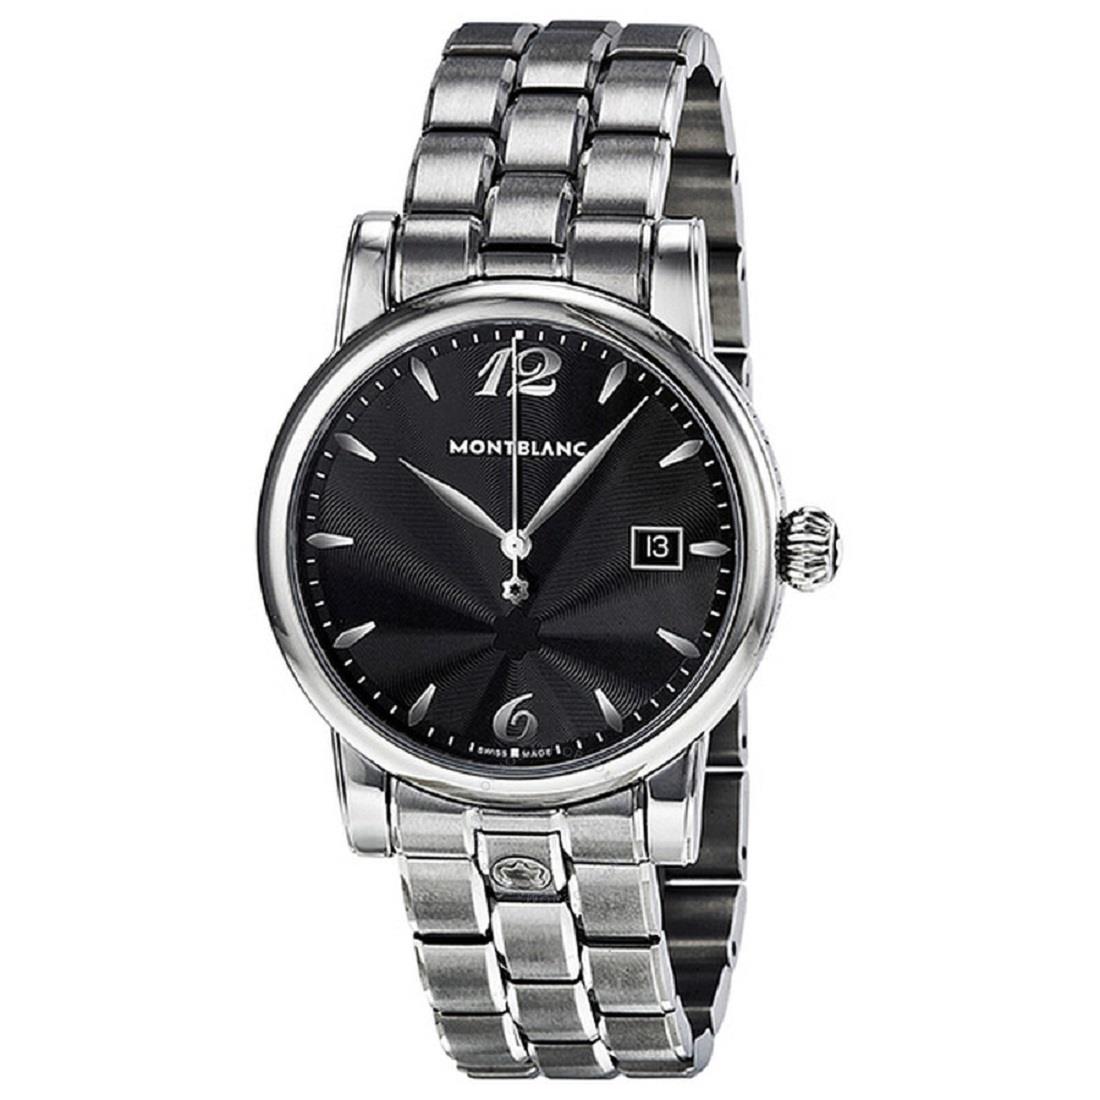 Watch with 39 mm case - MONTBLANC